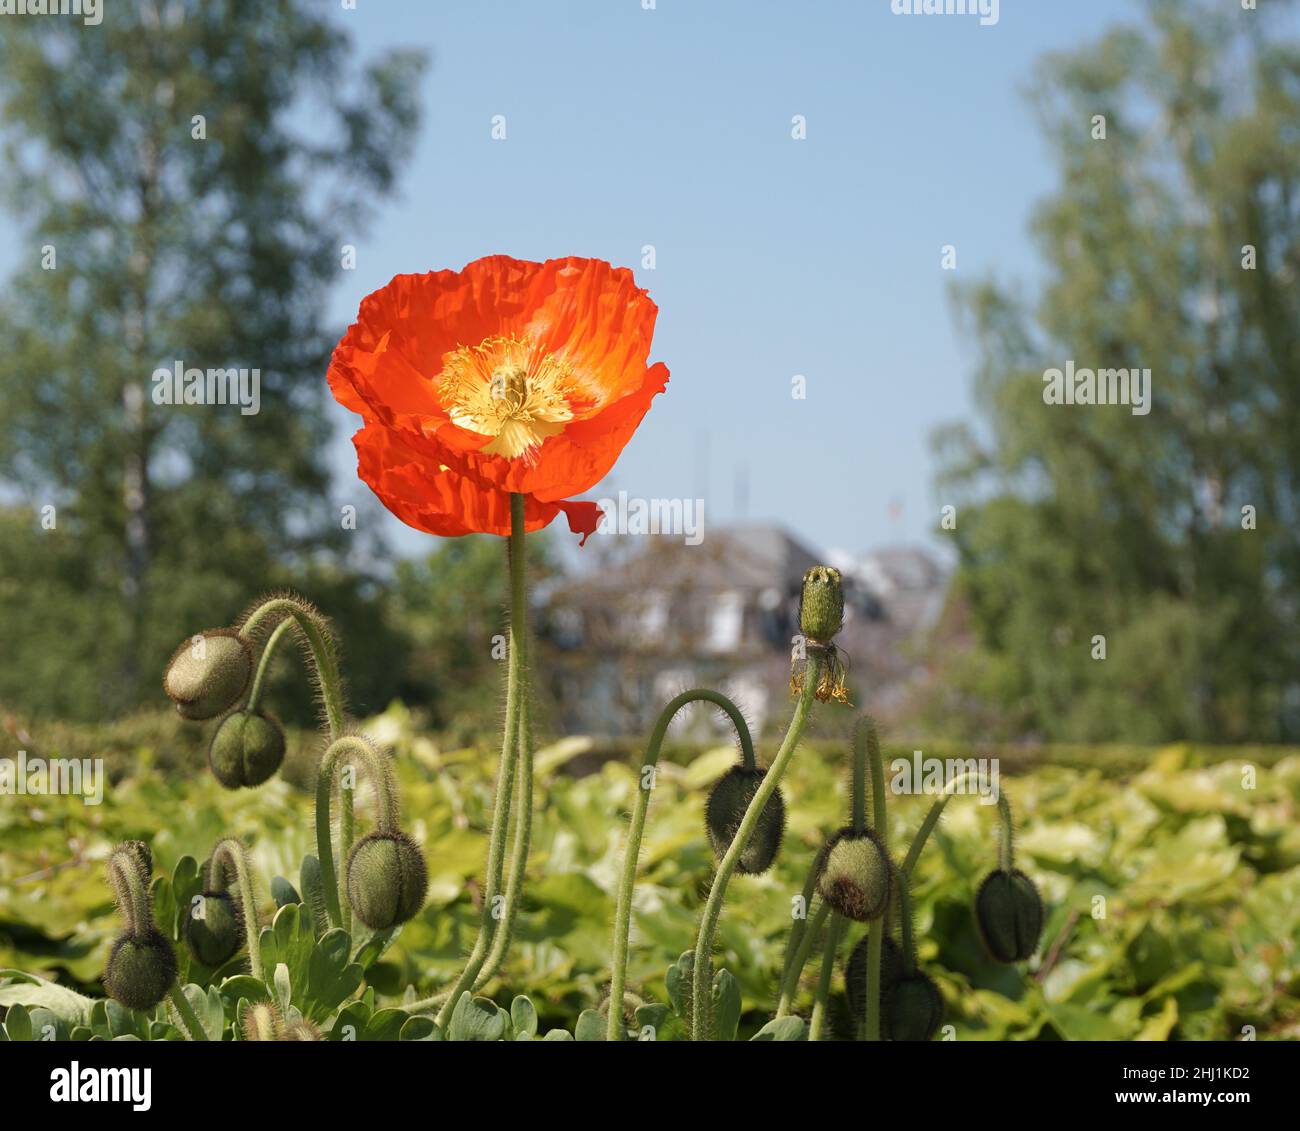 One red poppy blooming in the flowerbed Stock Photo